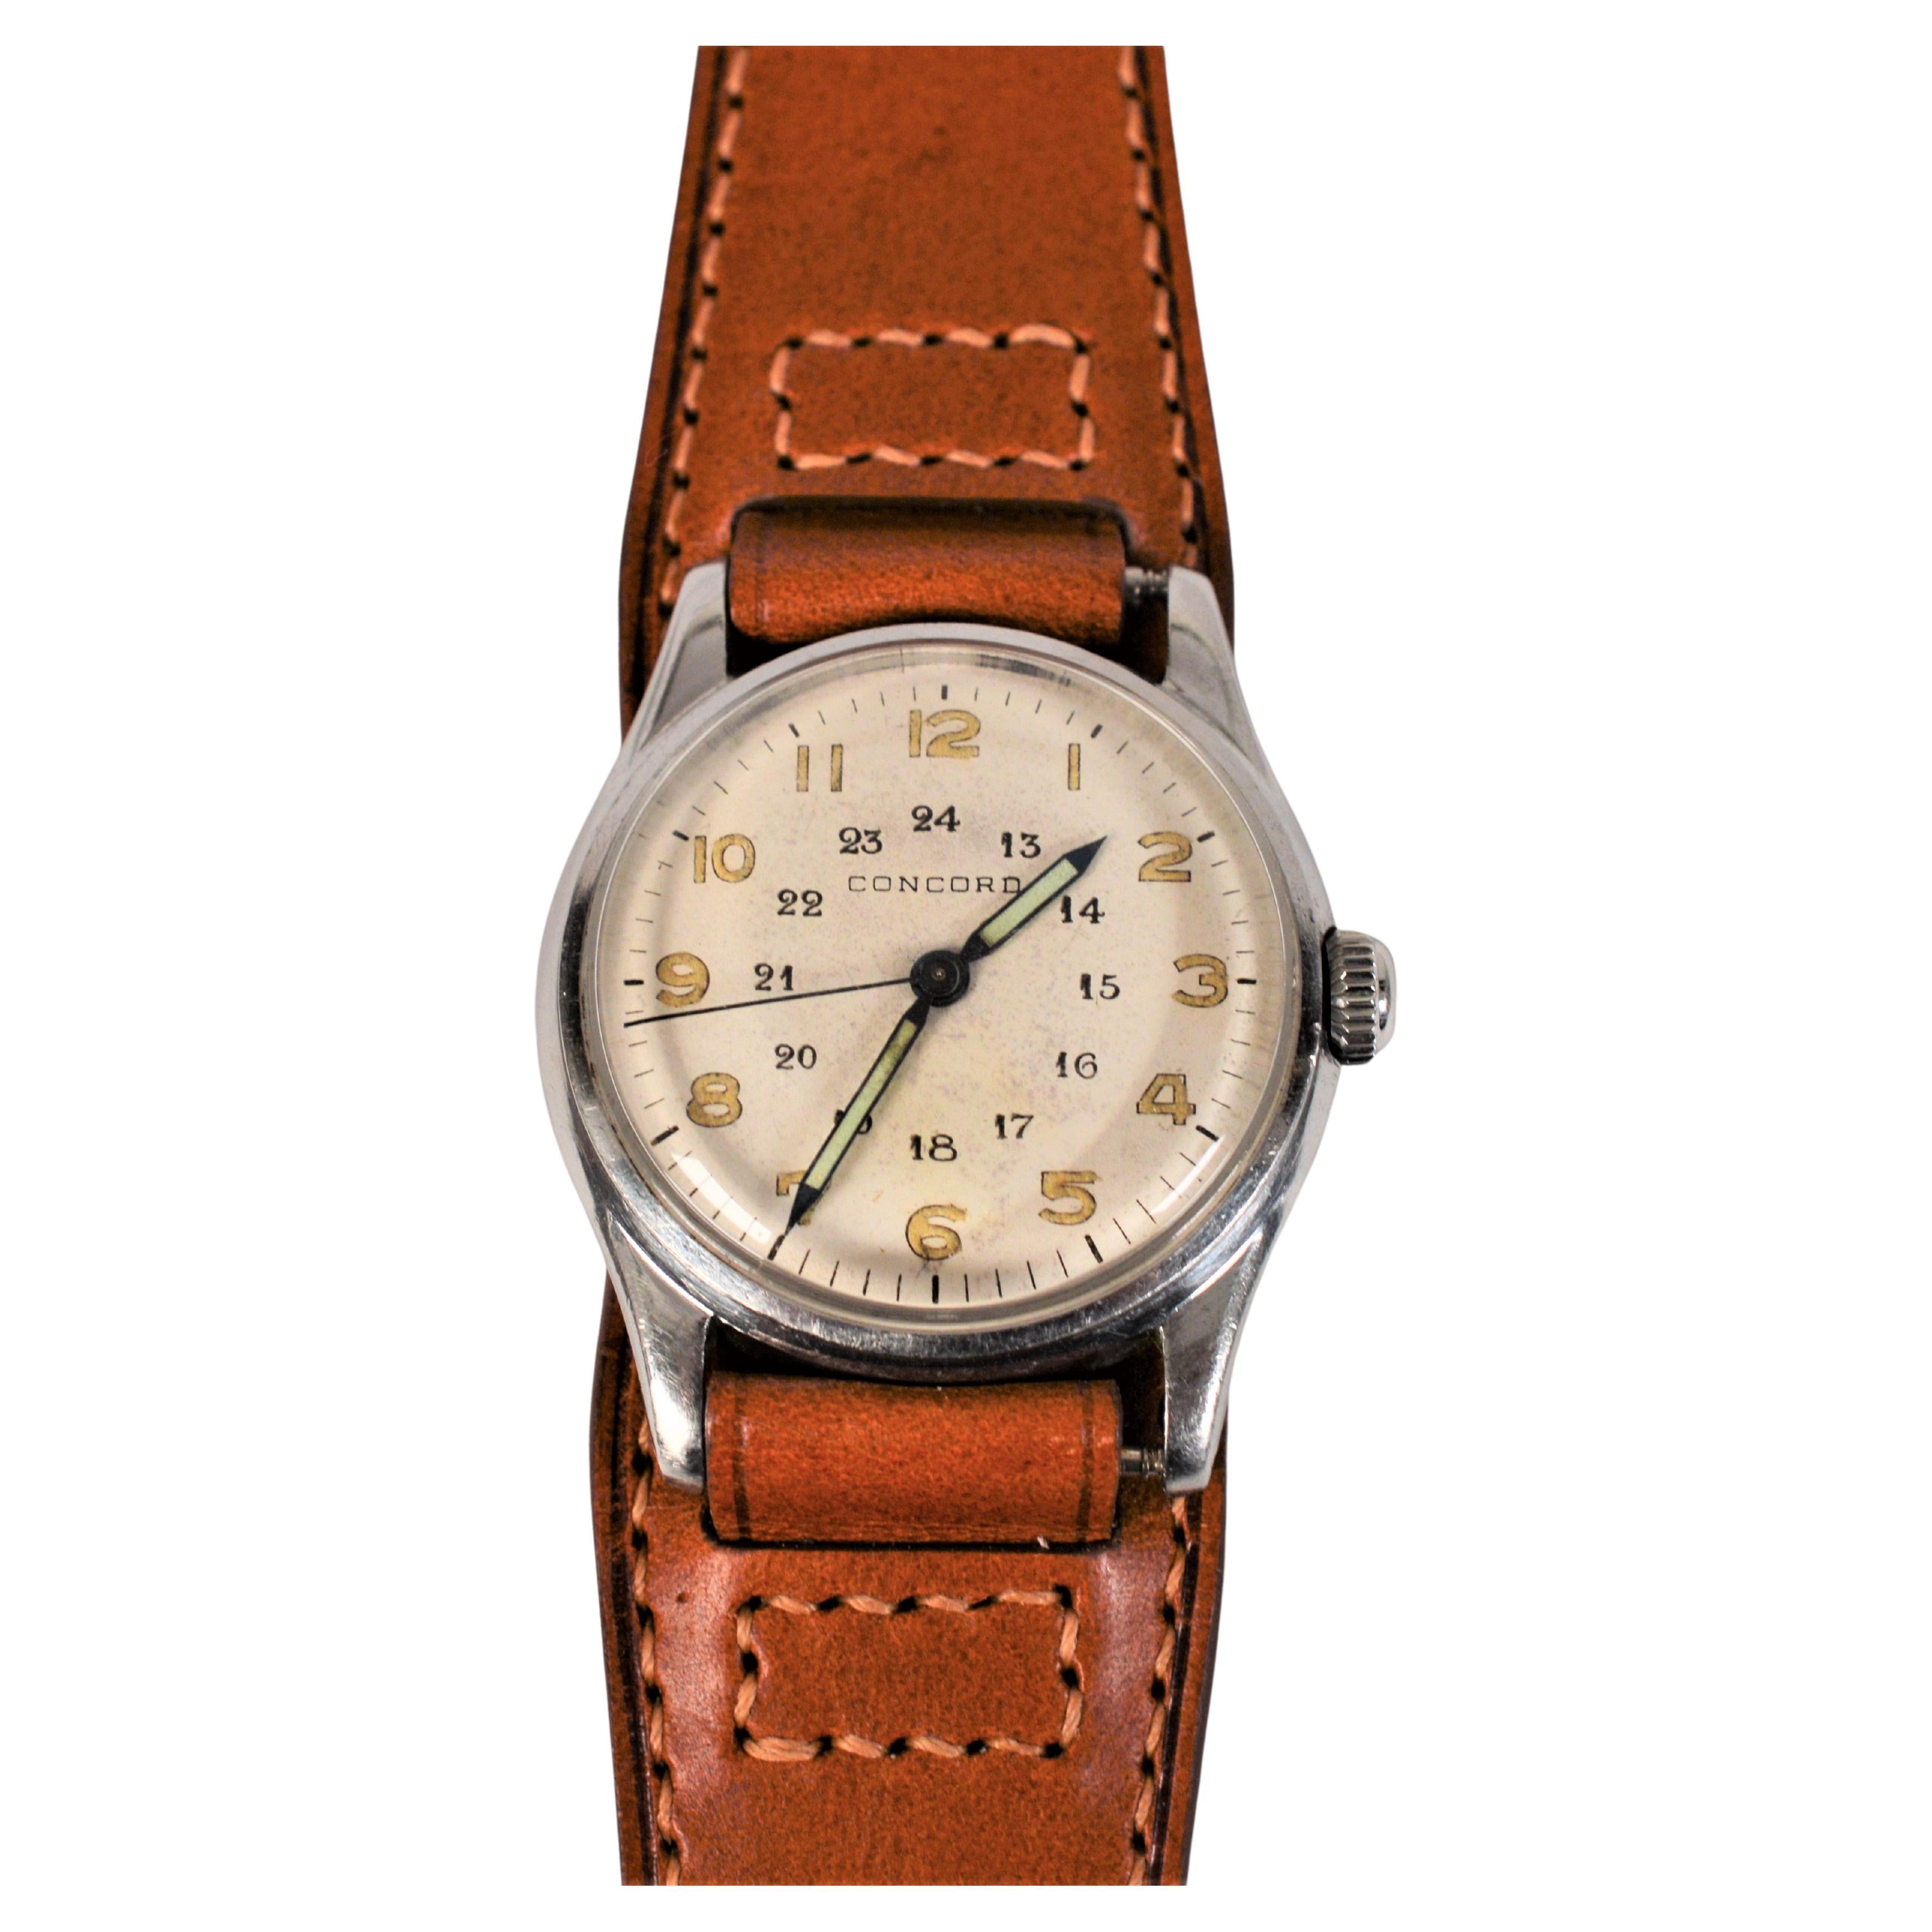 Enjoy this retro time find, circa mid 1940s. This 29mm Concord Stainless Steel WWII Era Men's Wrist Watch has an interesting 24 Hour Military style dial with illuminated spear hands. A manual wind Swiss movement powers this authentic vintage